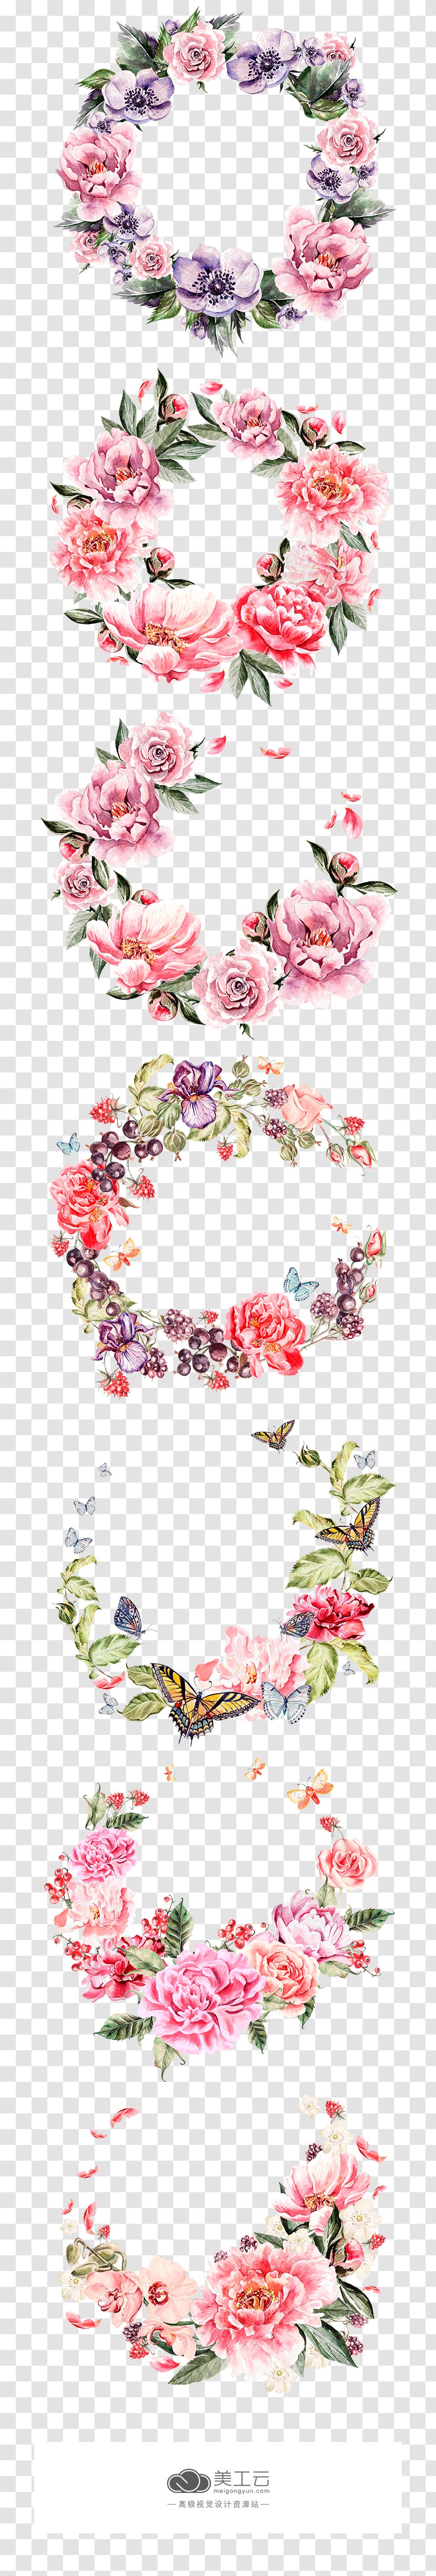 Wreath Flower Pink - White - Colorful Garland Effect Transparent PNG